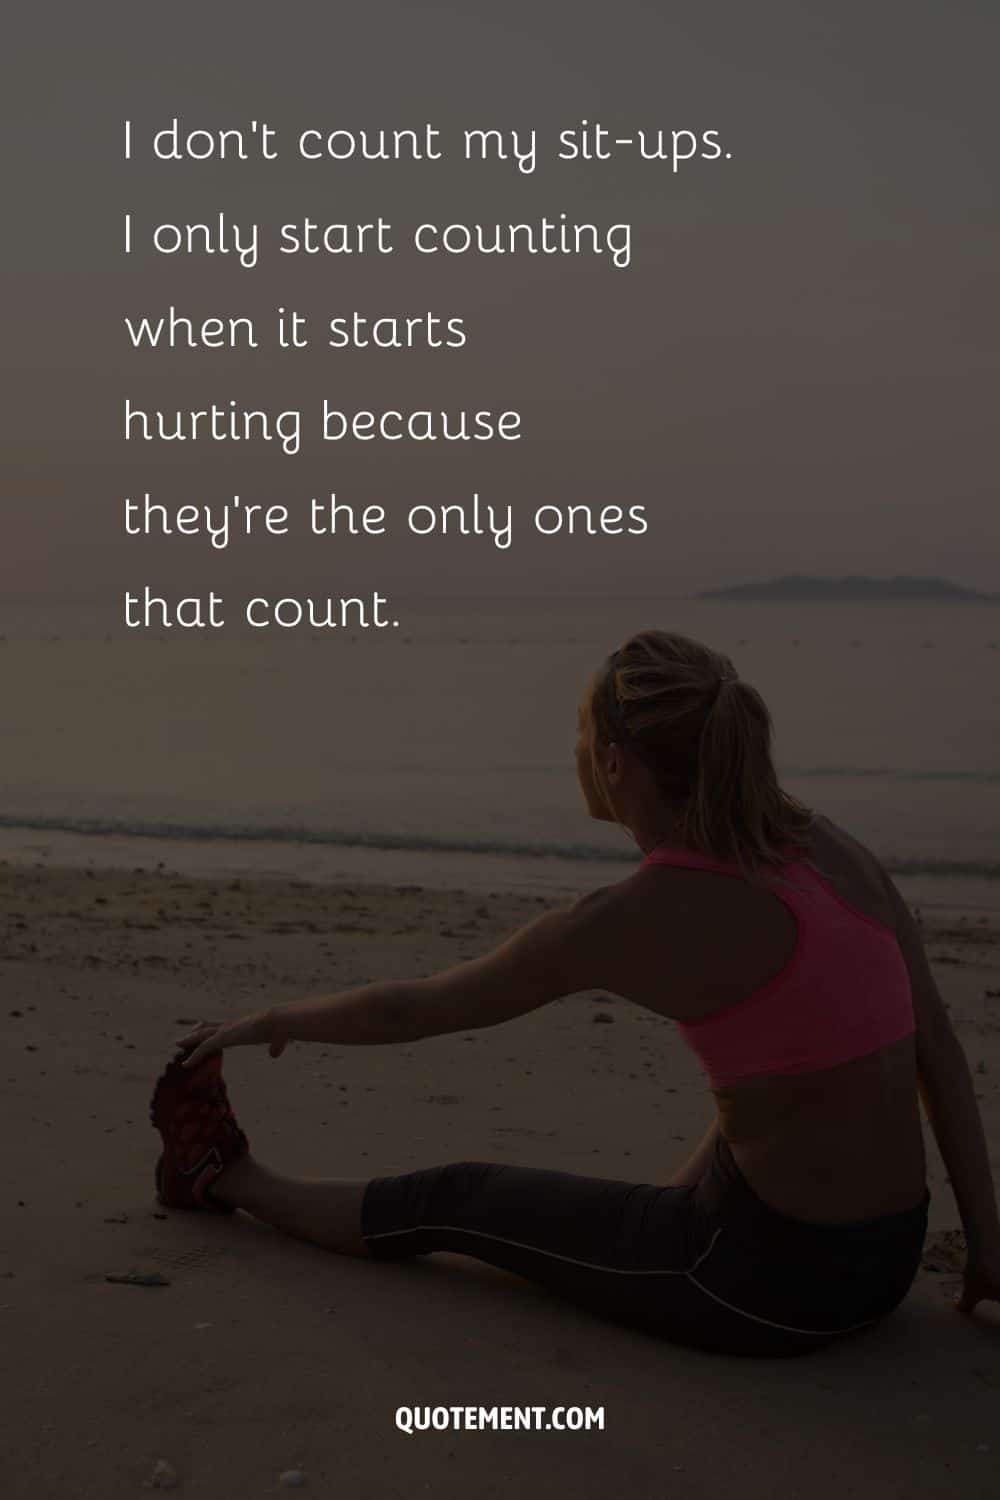 I don’t count my sit-ups. I only start counting when it starts hurting because they’re the only ones that count